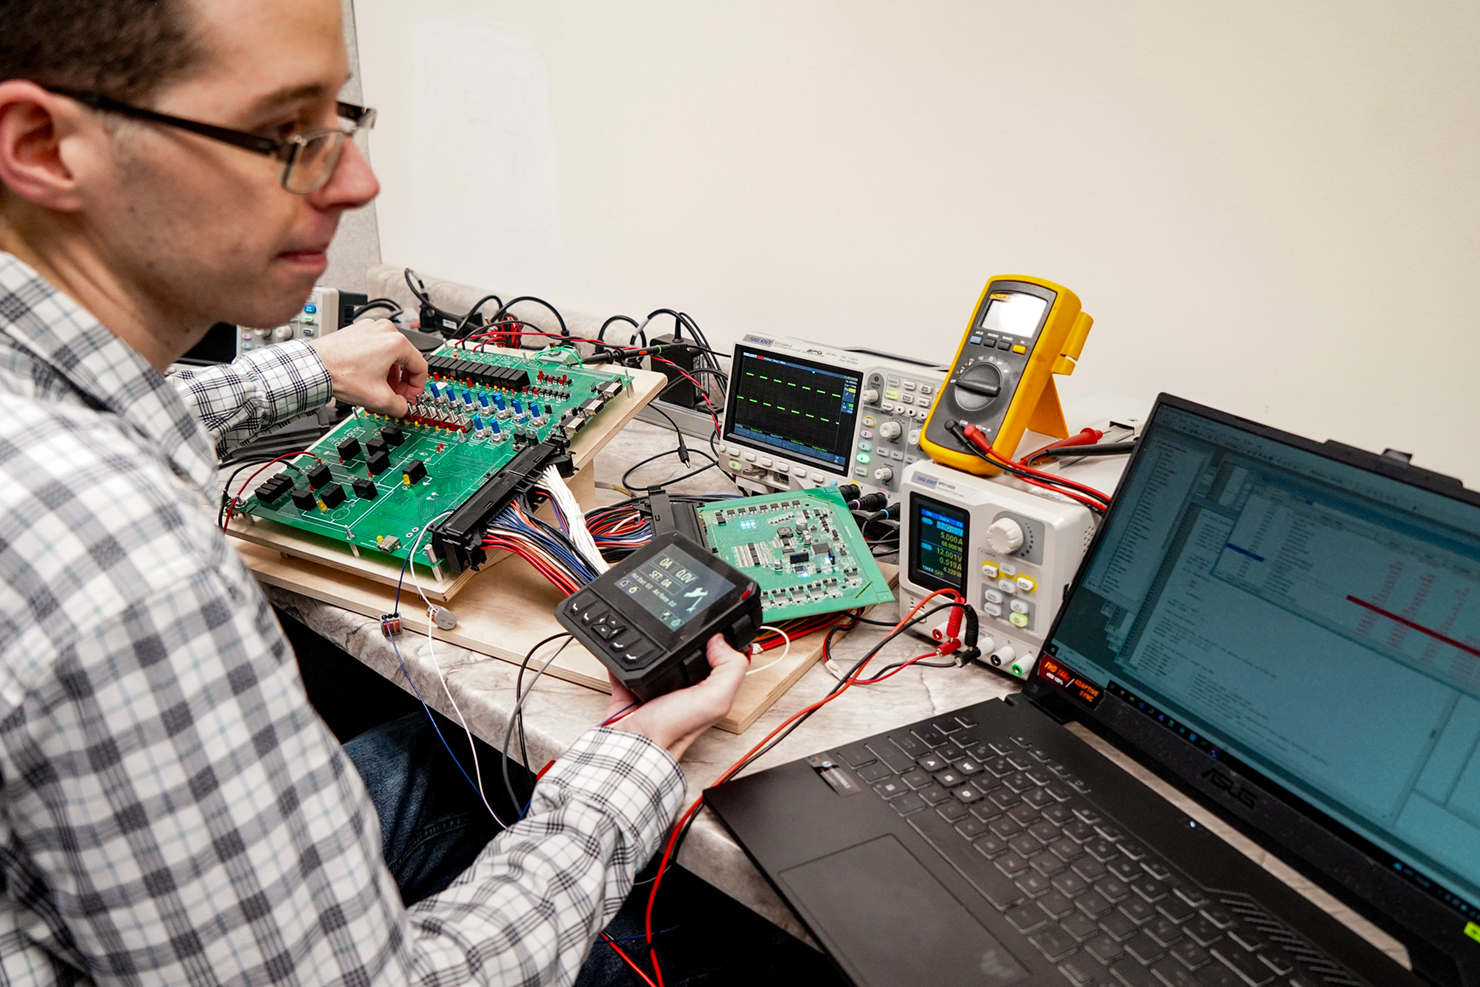 Engineer in front of computer testing components